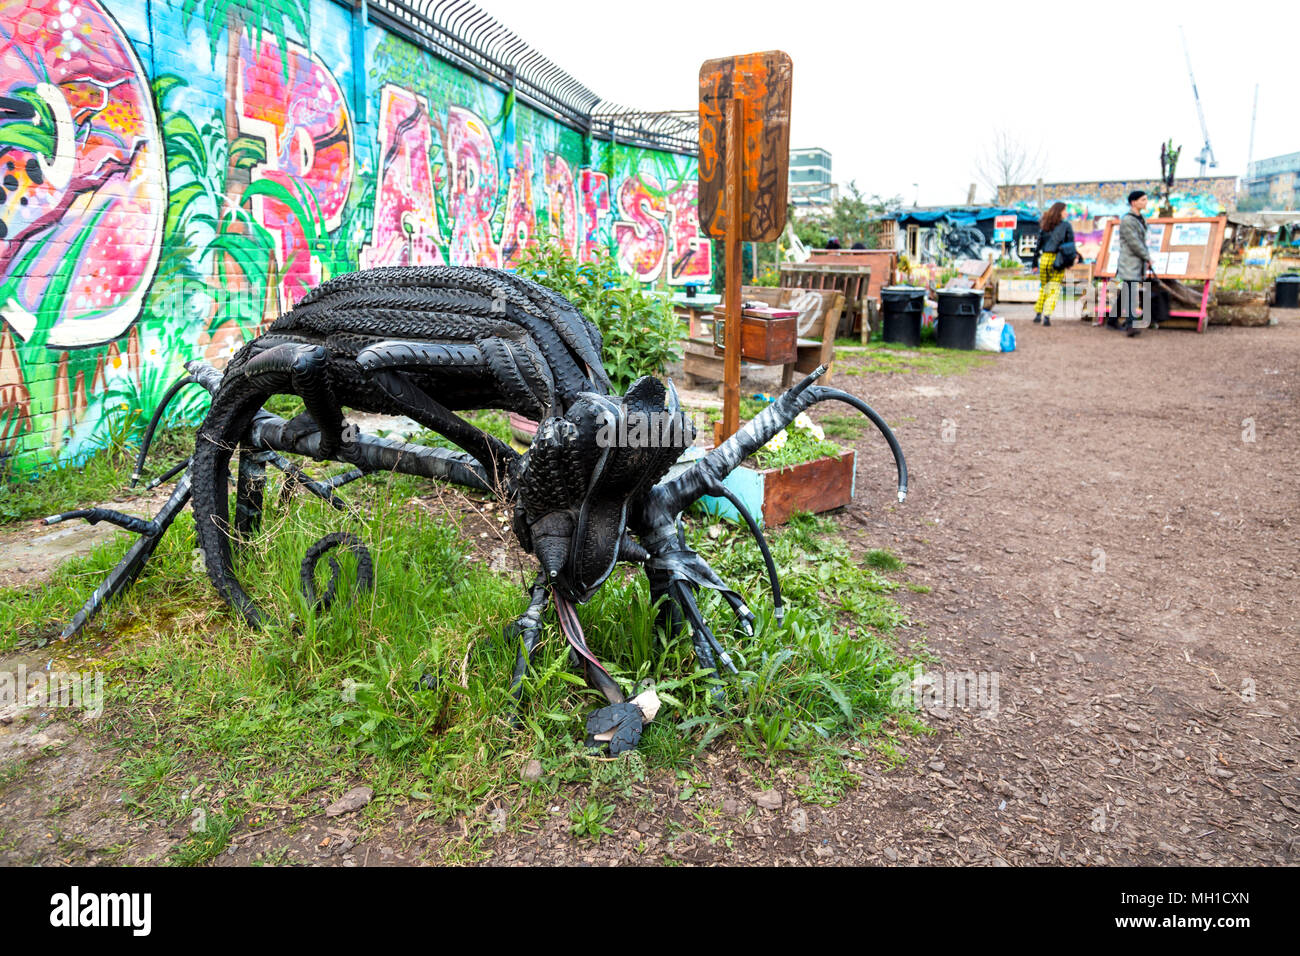 A chameleon sculpture make out of tires by artist Annalisa Mandia at The Nomadic Community Garden off Brick Lane, London, UK Stock Photo